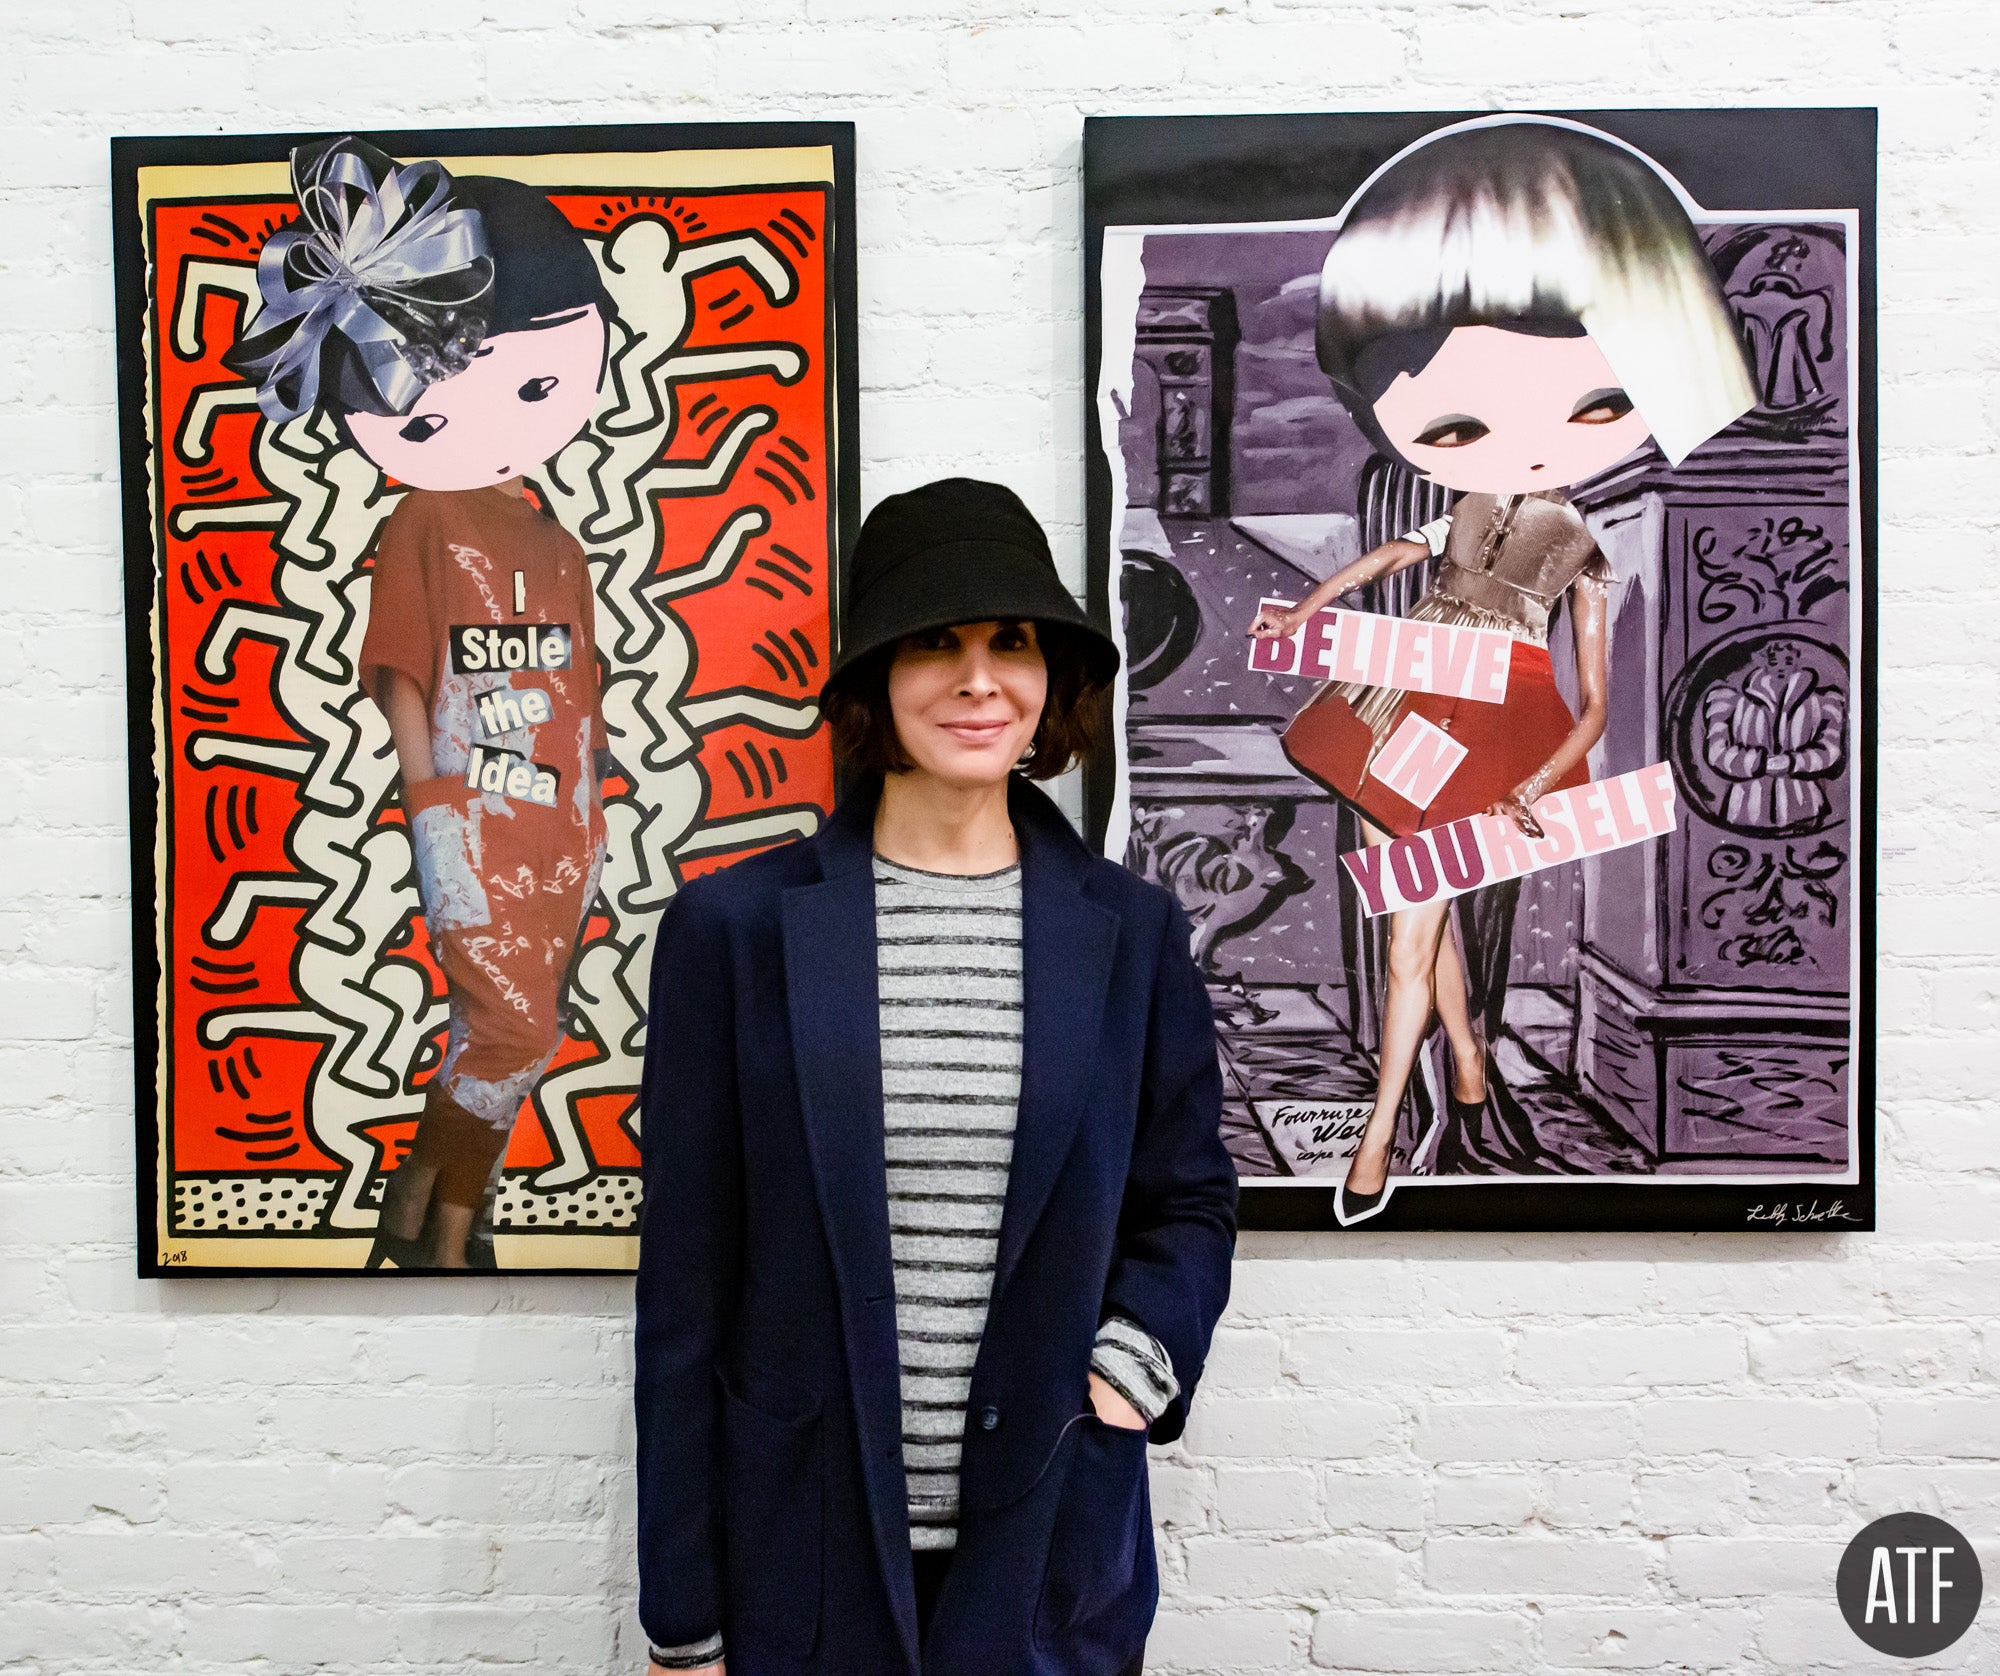 Get to know PhoebeNewYork: An Interview with artist Libby Schoettle